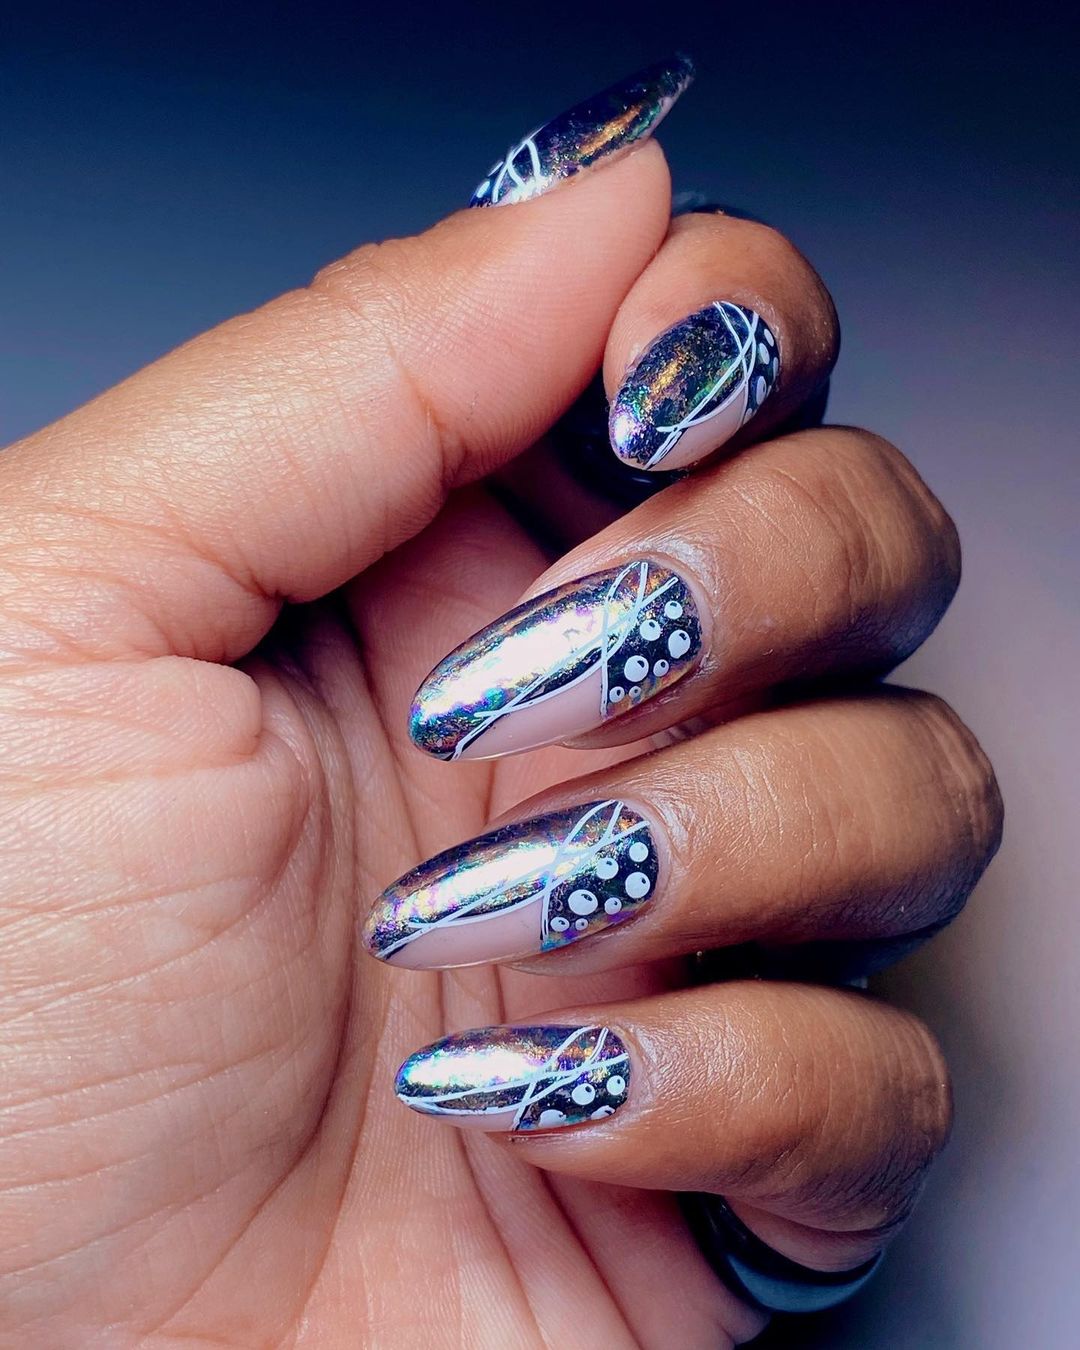 7 Easy and Stylish Step-by-Step Beginner Nail Art Tutorials